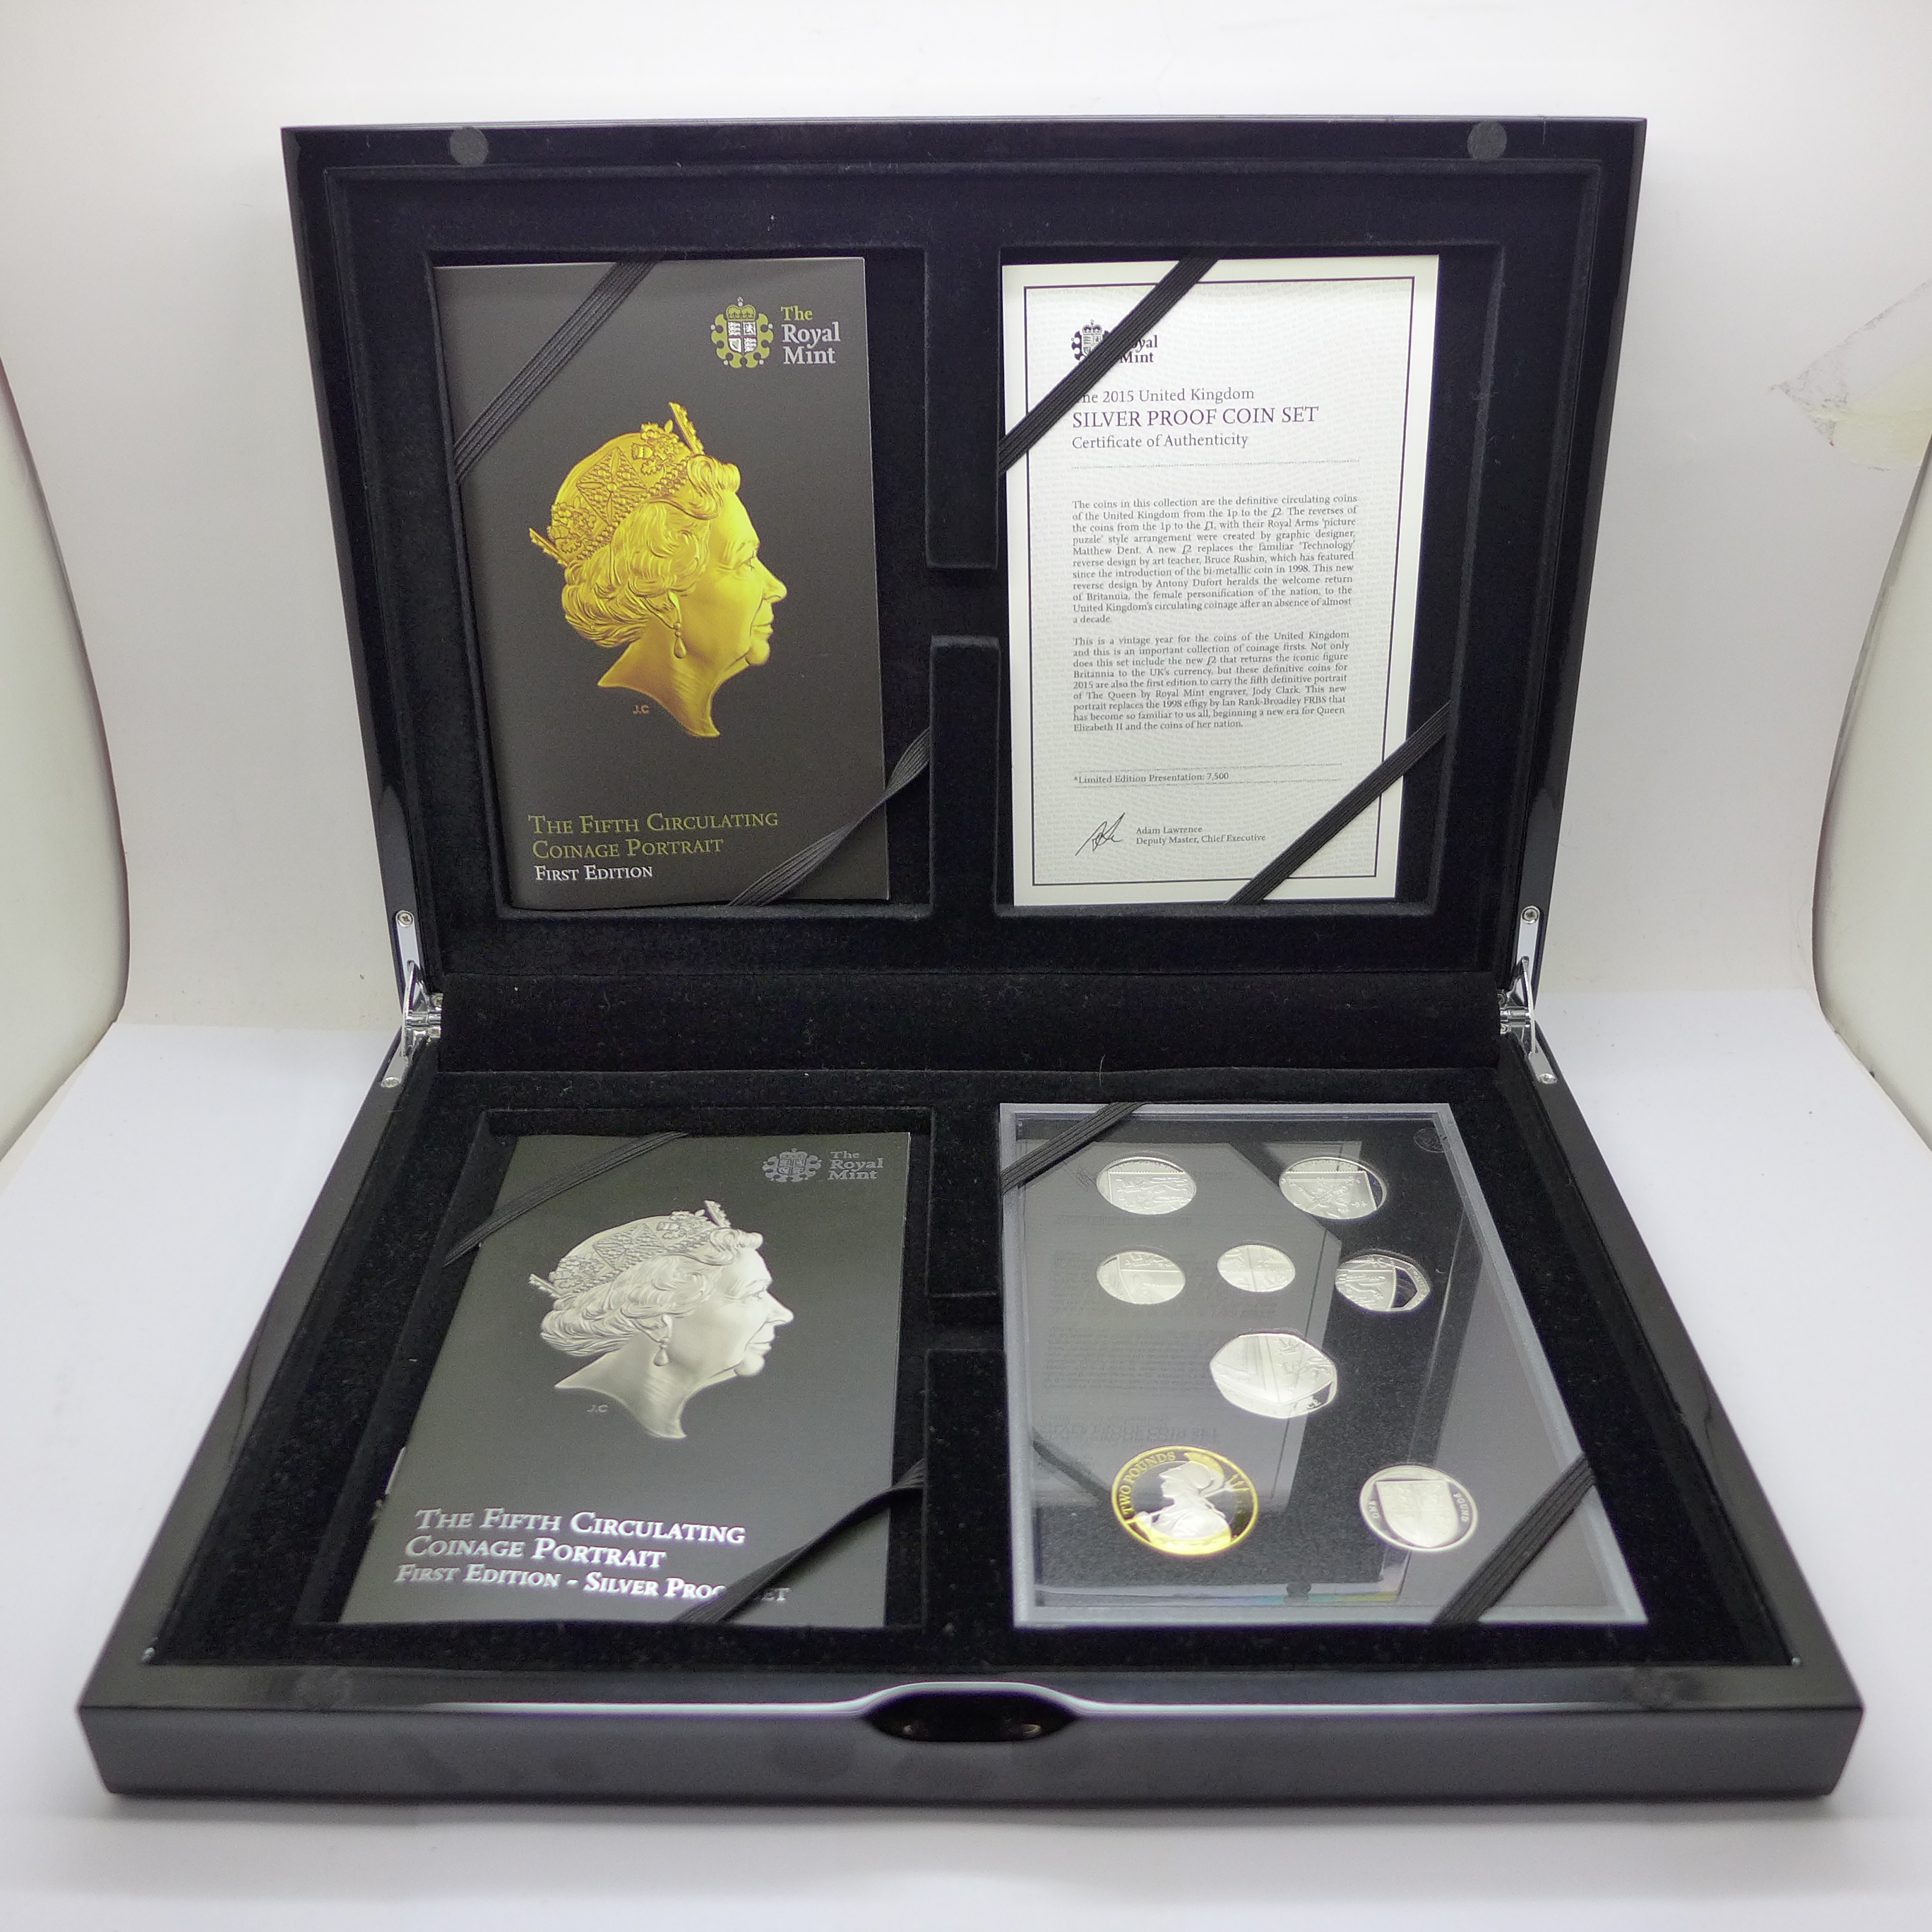 A 2015 silver proof coin set, the fifth circulation coinage portrait, first edition set, boxed